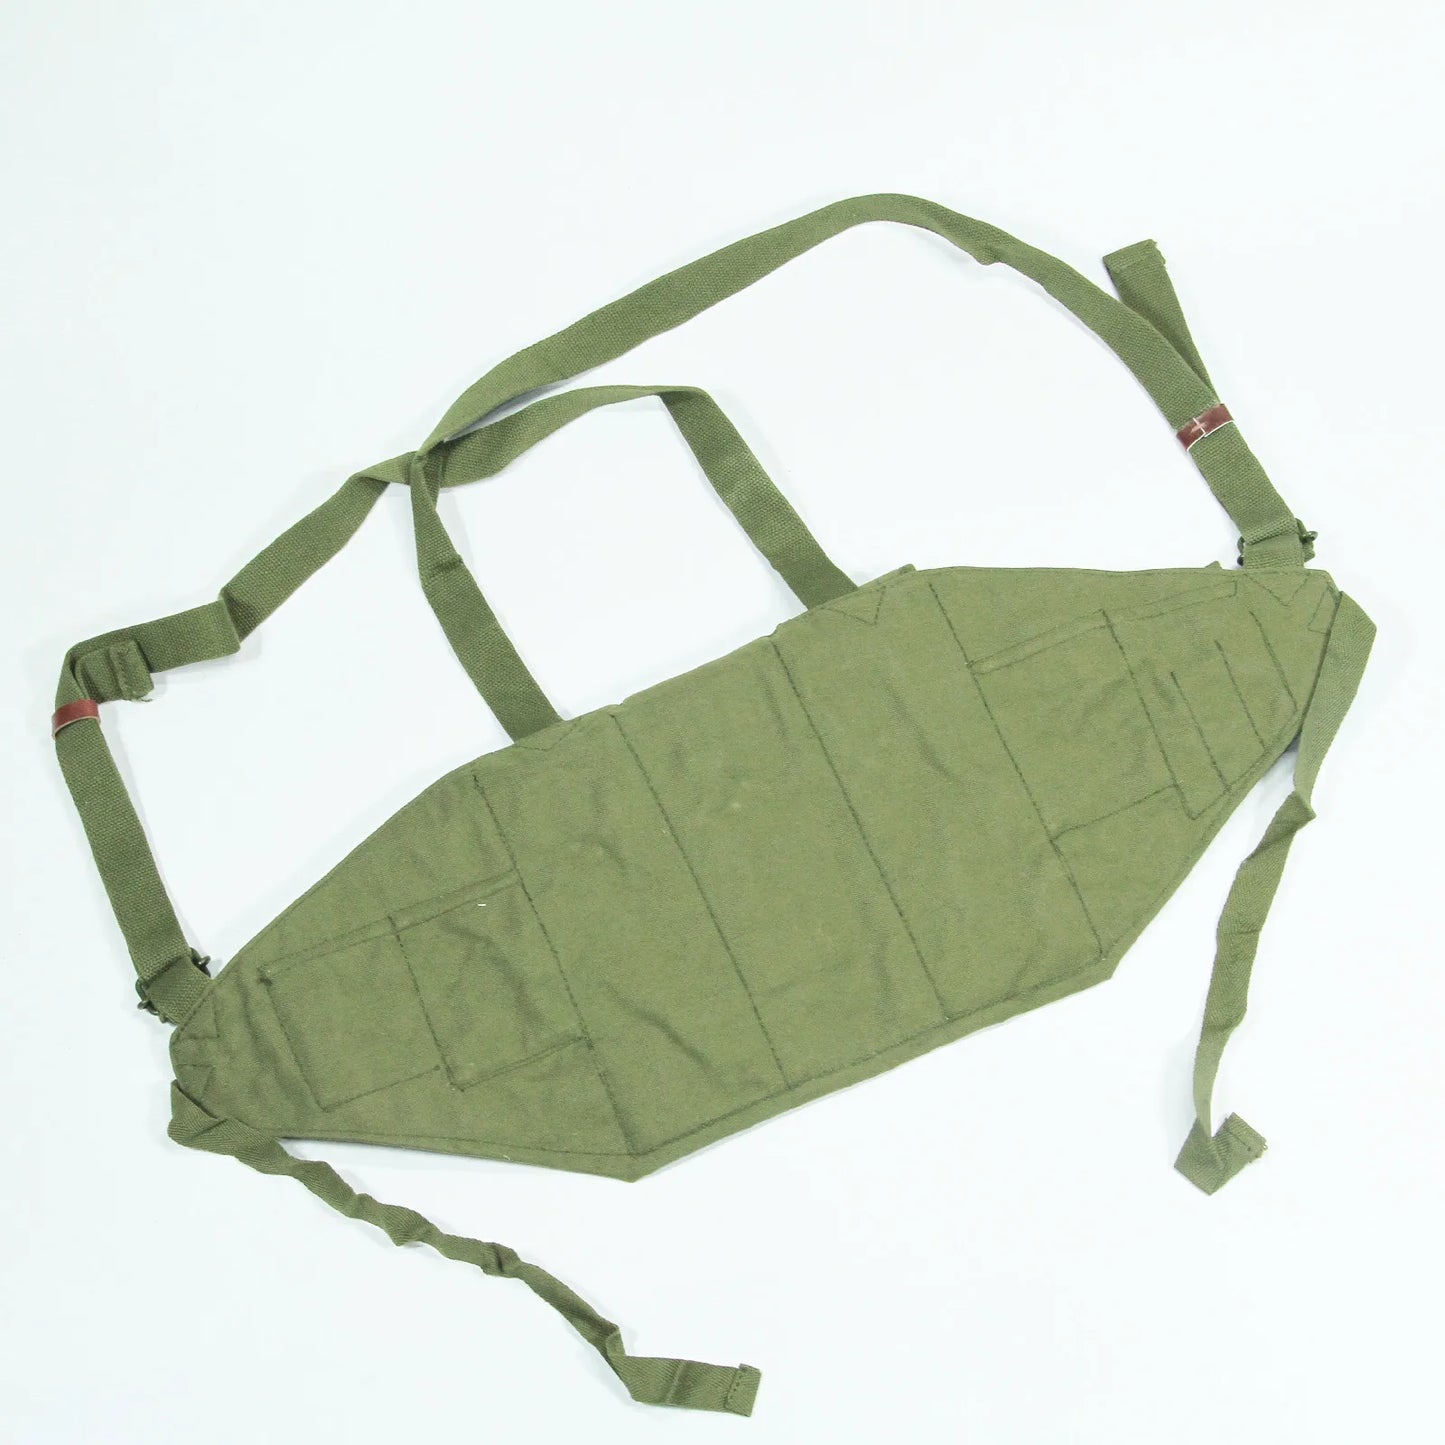 Surplus Chinese Type 56 Chest Rig 7-Pocket Bandoleer For AK Magazines